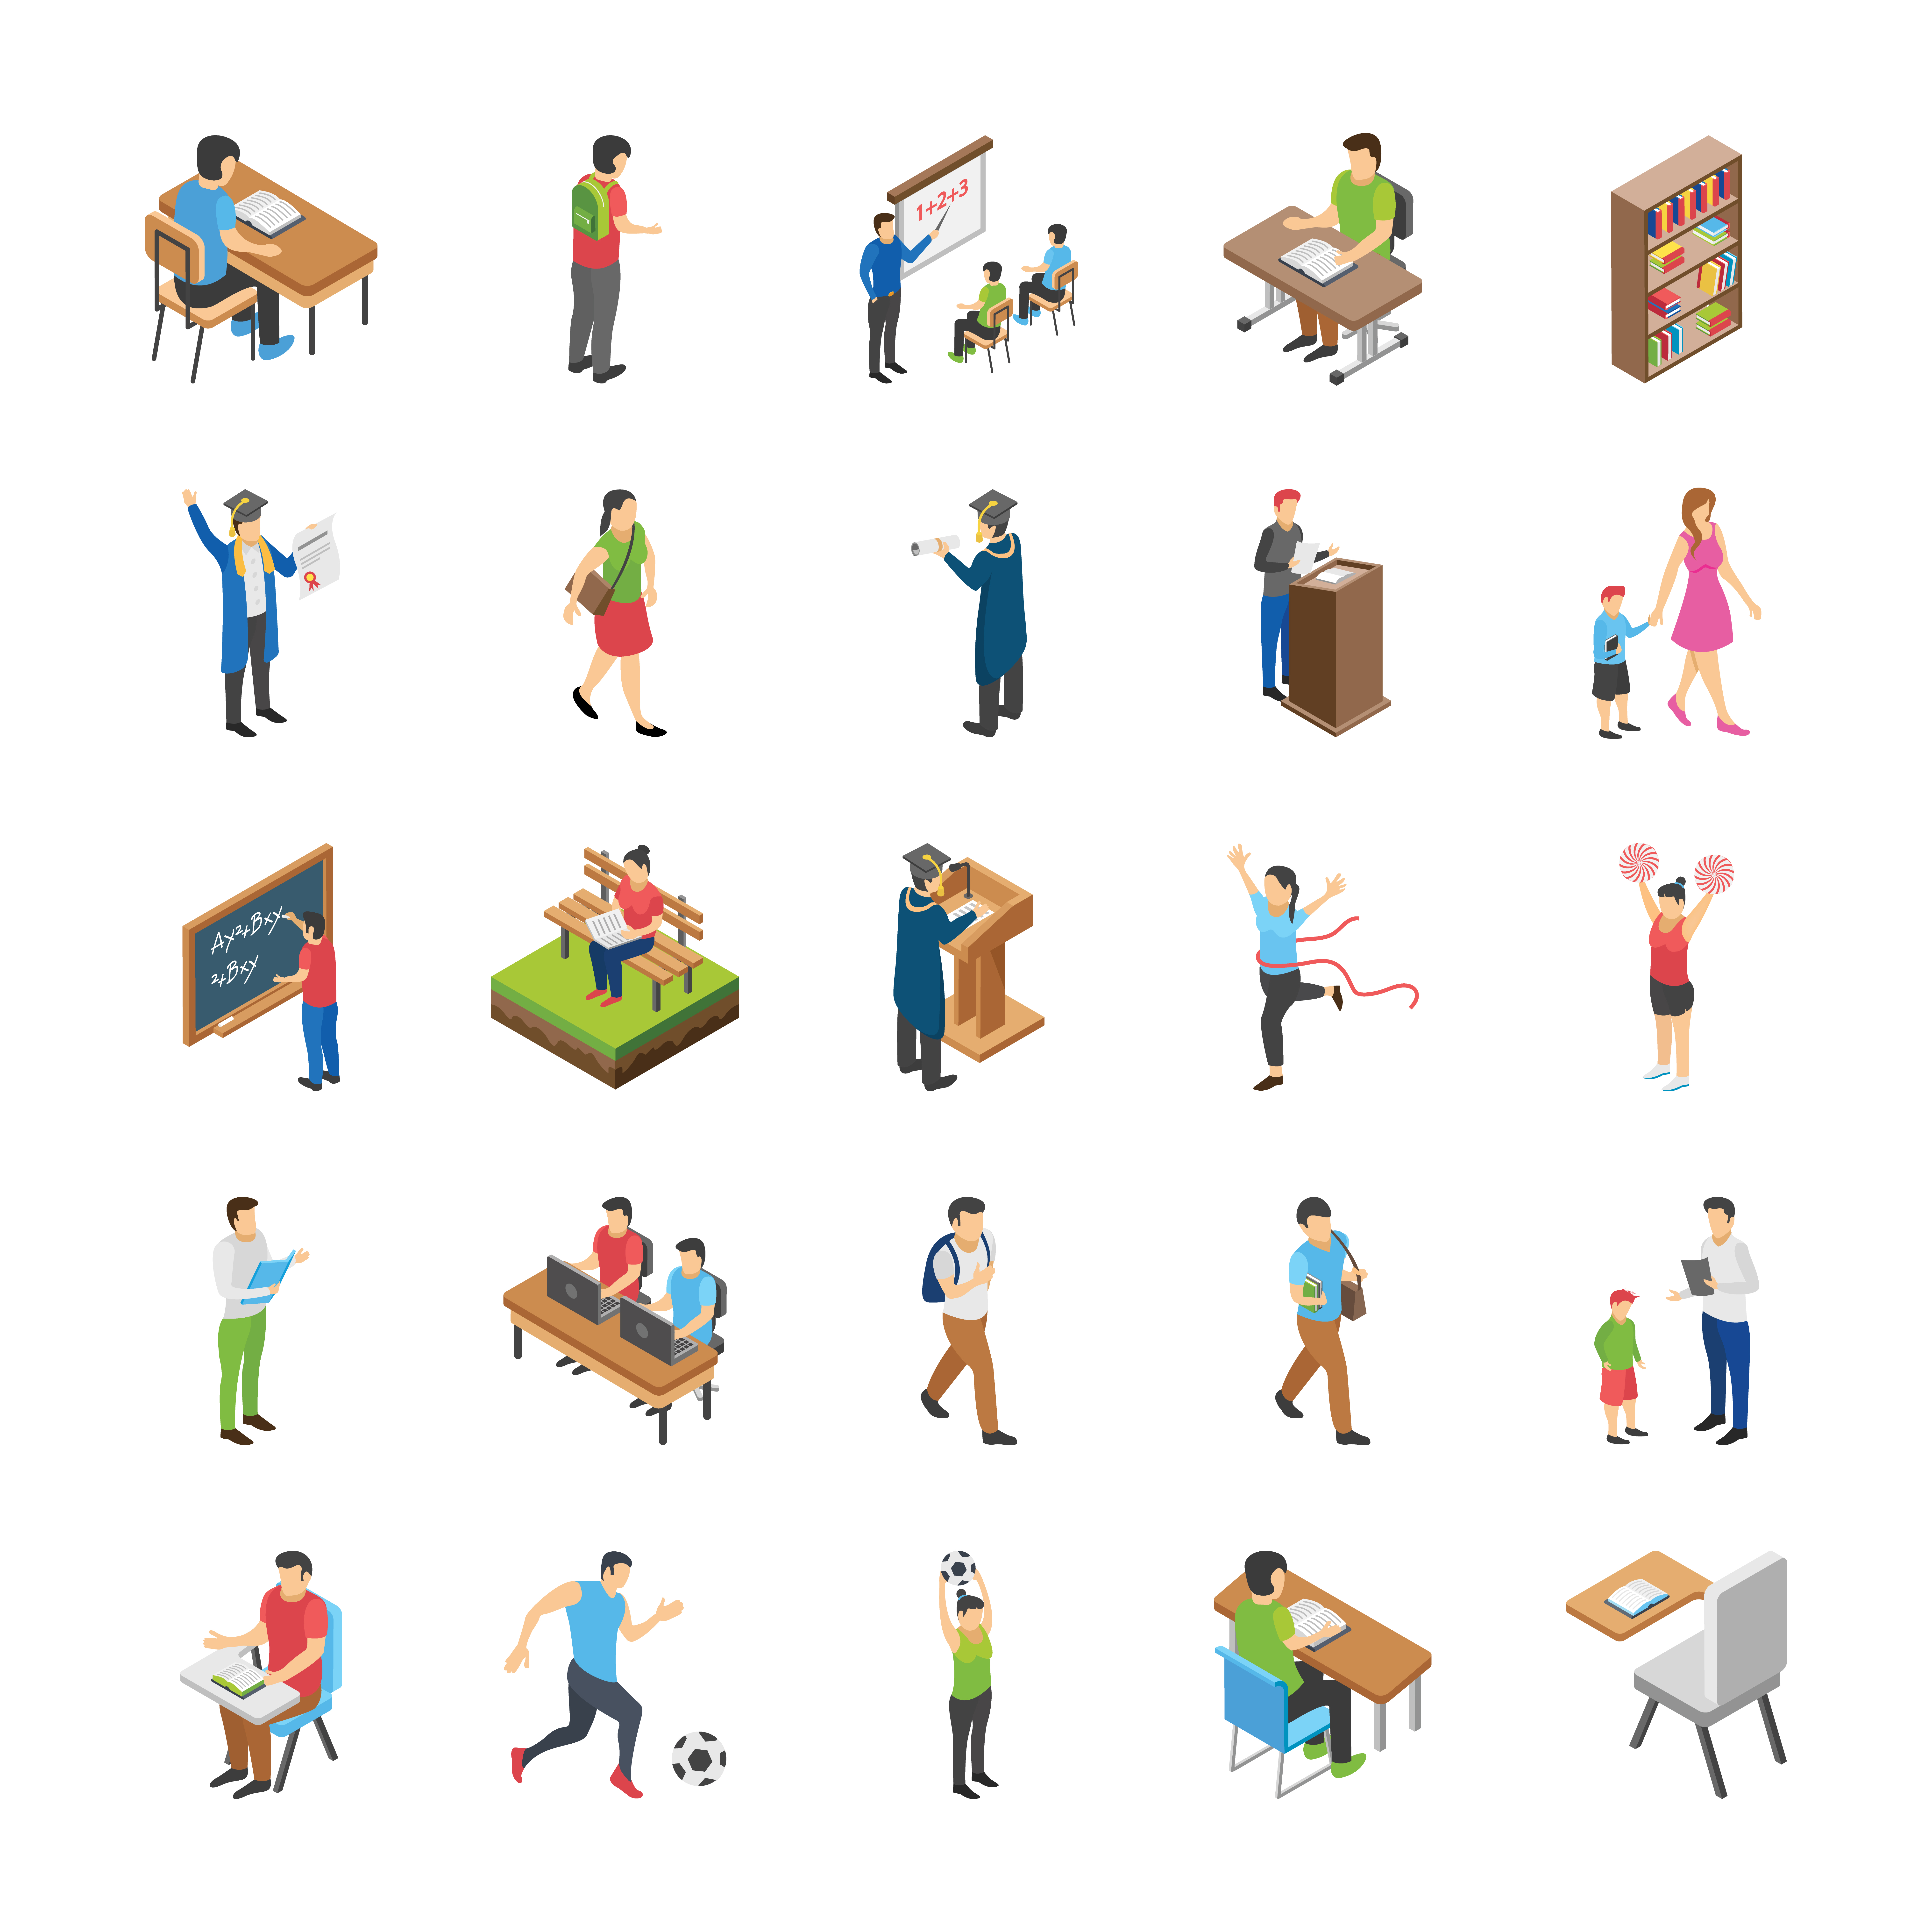 Download College and University Students Flat Icons 662476 - Download Free Vectors, Clipart Graphics ...